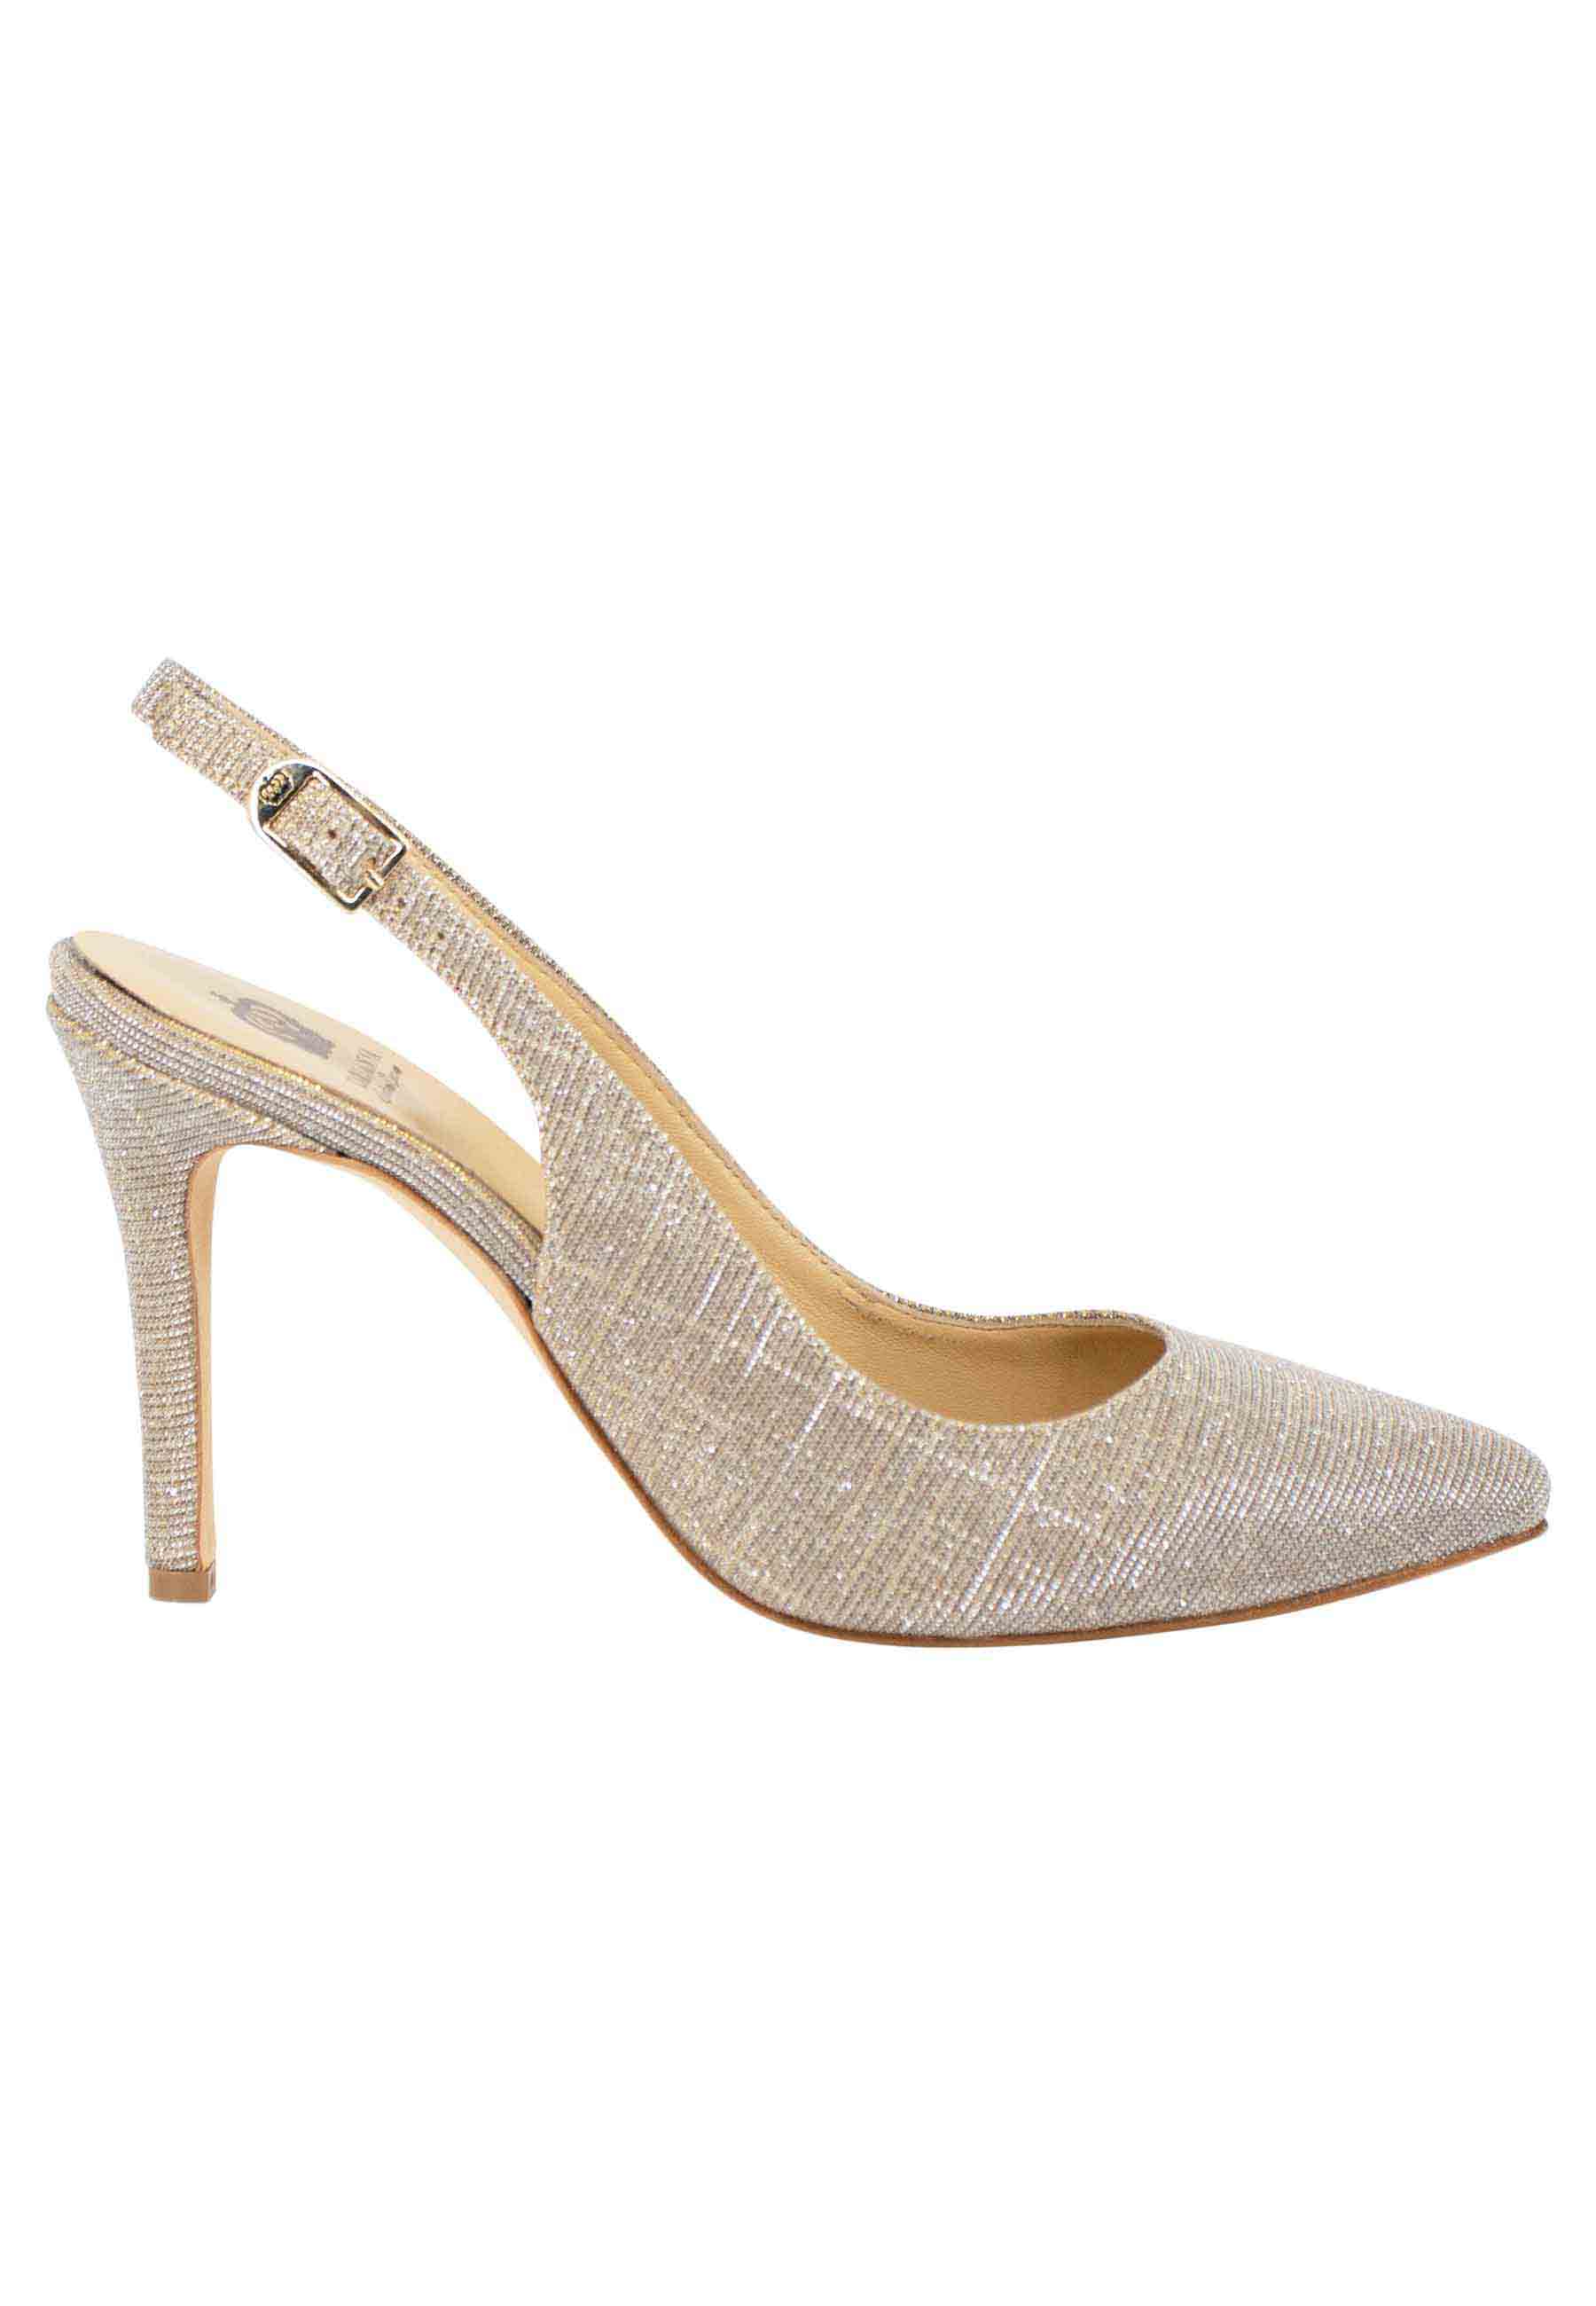 Women's slingback pumps in nude fabric with high heel